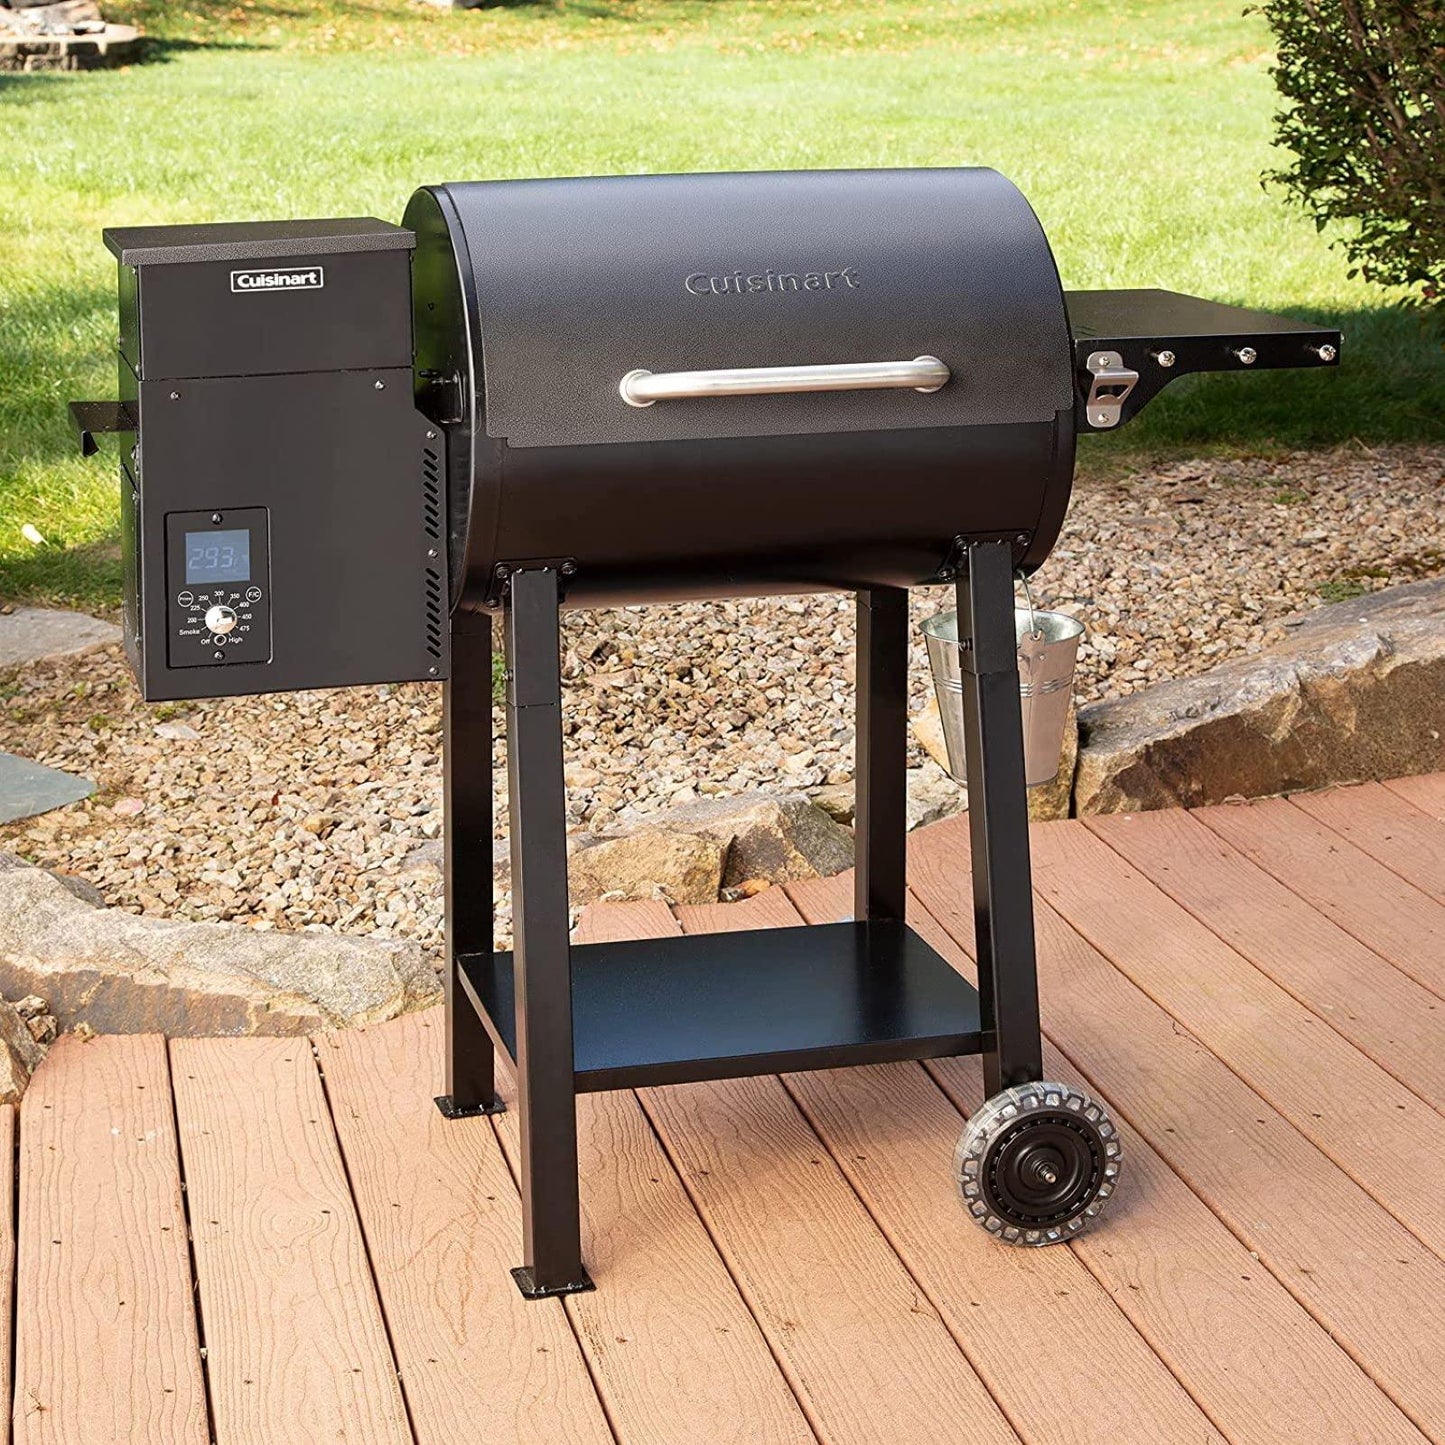 Cuisinart CPG-465 Portable Wood Pellet Grill & Smoker with Digital Controller, 465 sq. inch Cooking Space, 8-in-1 Cooking Capabilities - Smoke, BBQ, Grill, Roast, Braise, Sear, Bake, & Char-Grill - CookCave